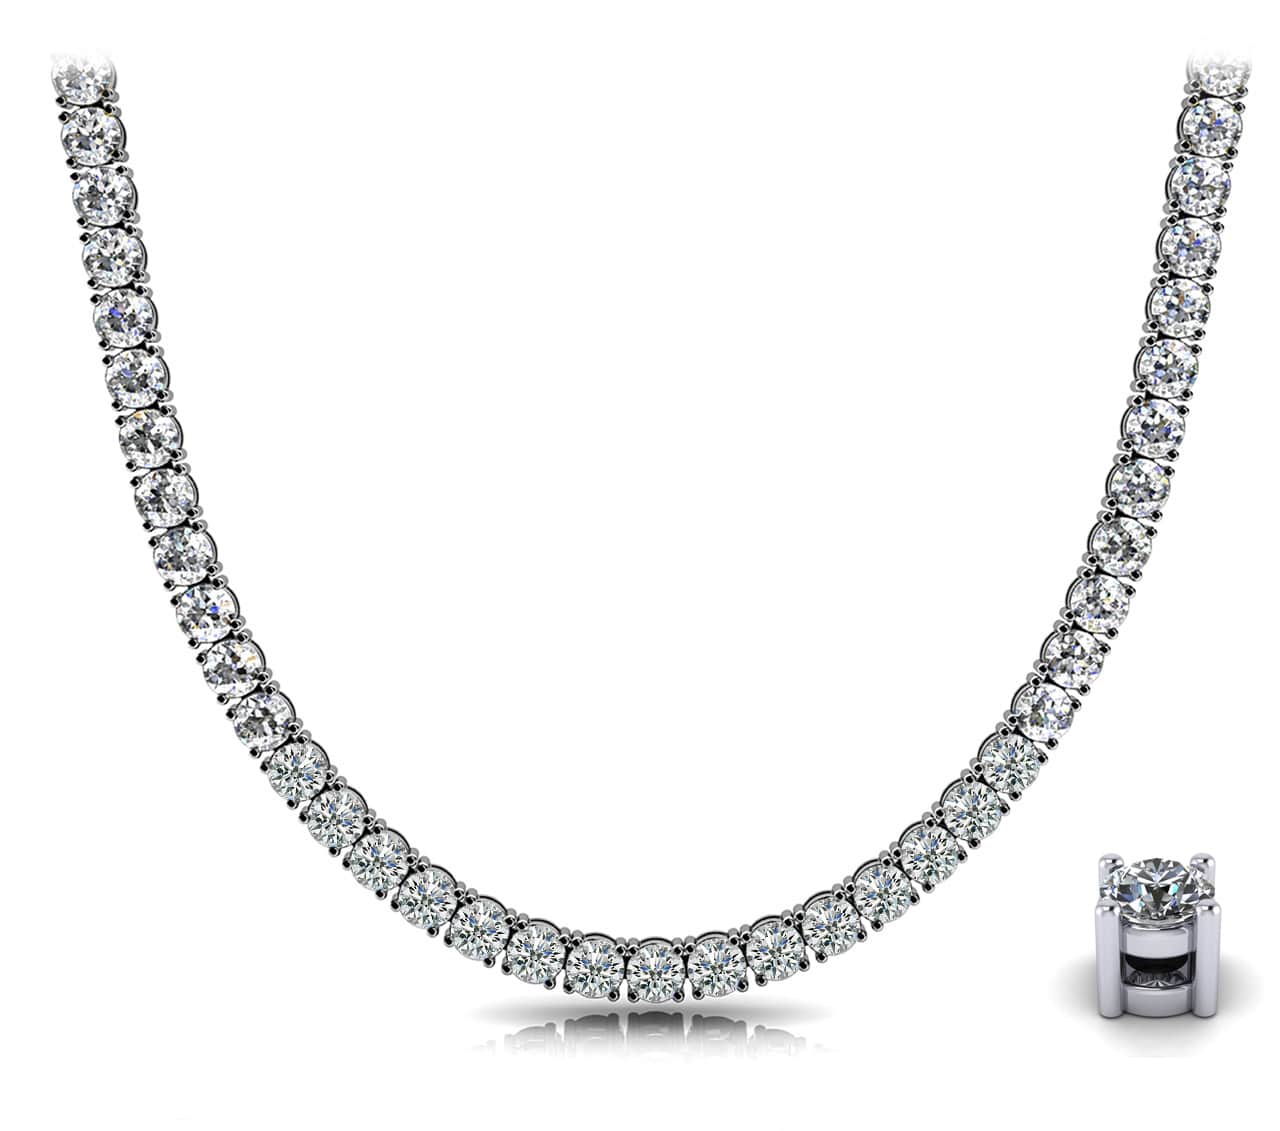 4 Prong Riviera Diamond Necklace In 18K 14K Yellow Gold White Gold Or Platinum